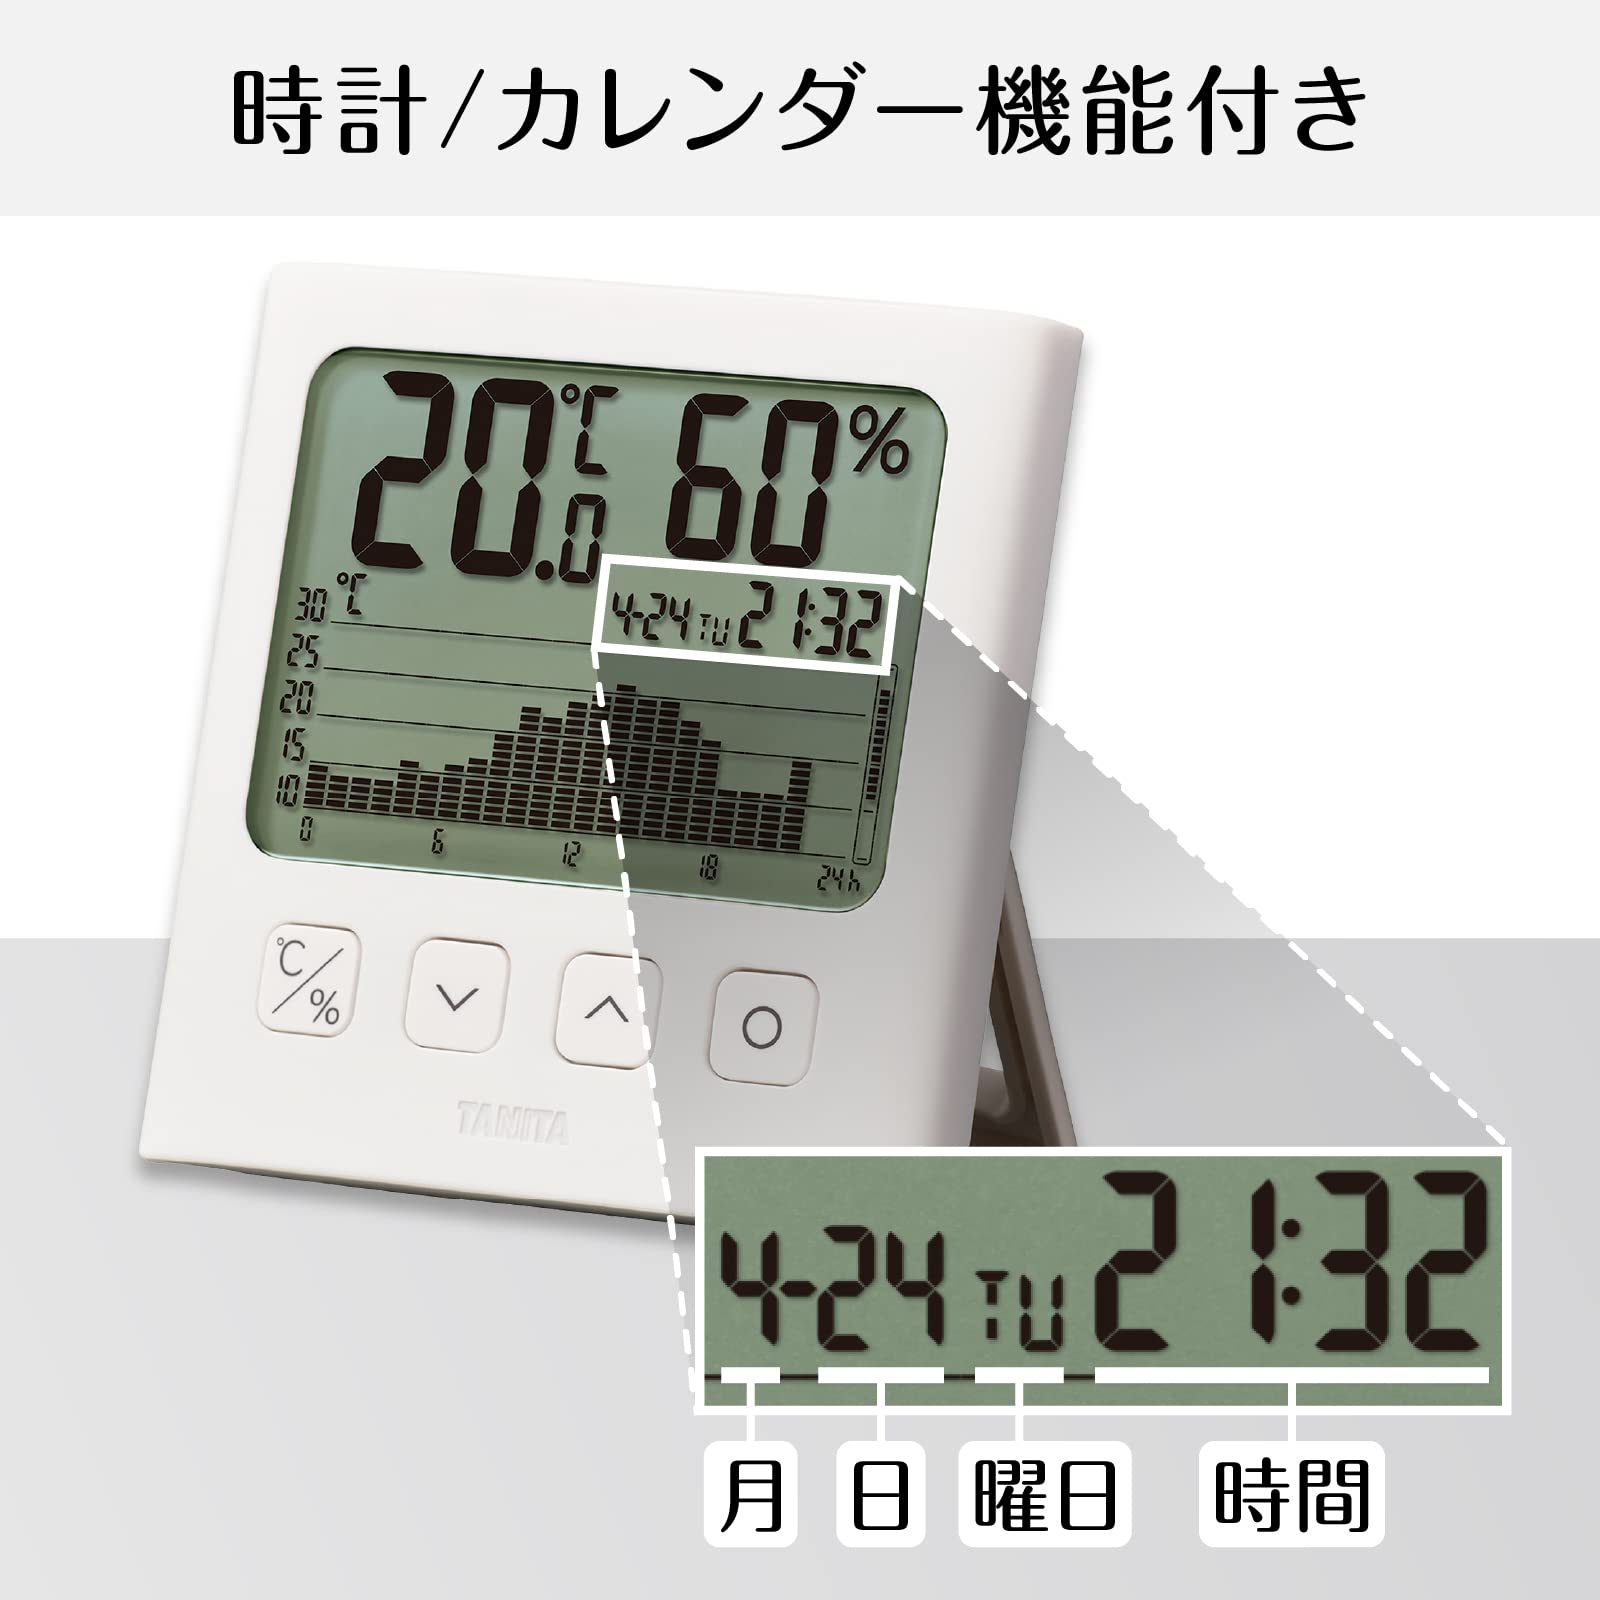 Tanita tt-580 electronic hygrometer, with temperature humidity chart